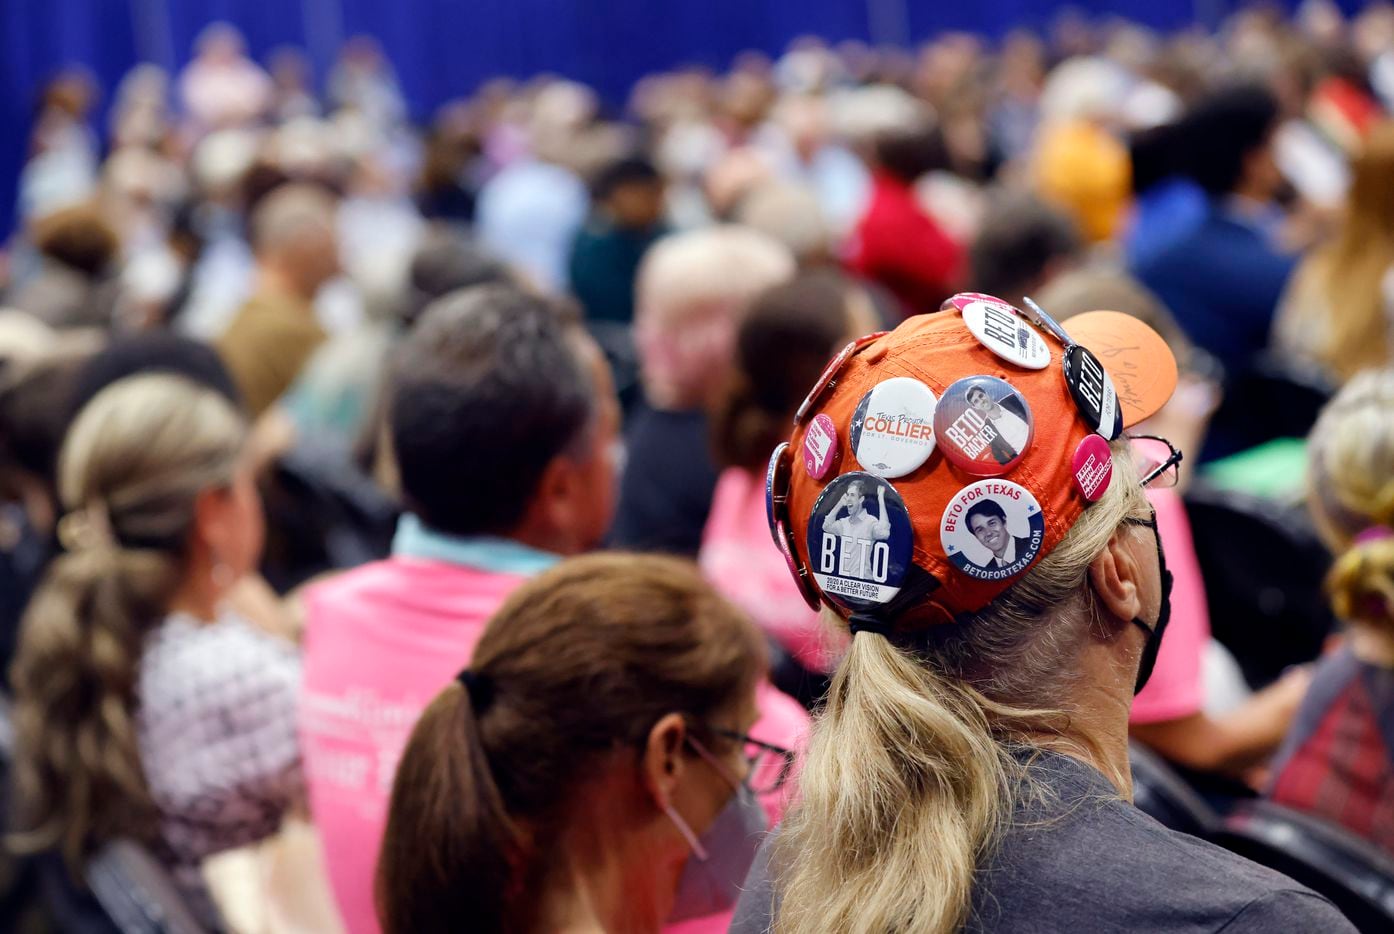 Mike Nichols of Tyler, Texas sports a cap full of Beto O’Rourke buttons during the SDEC...